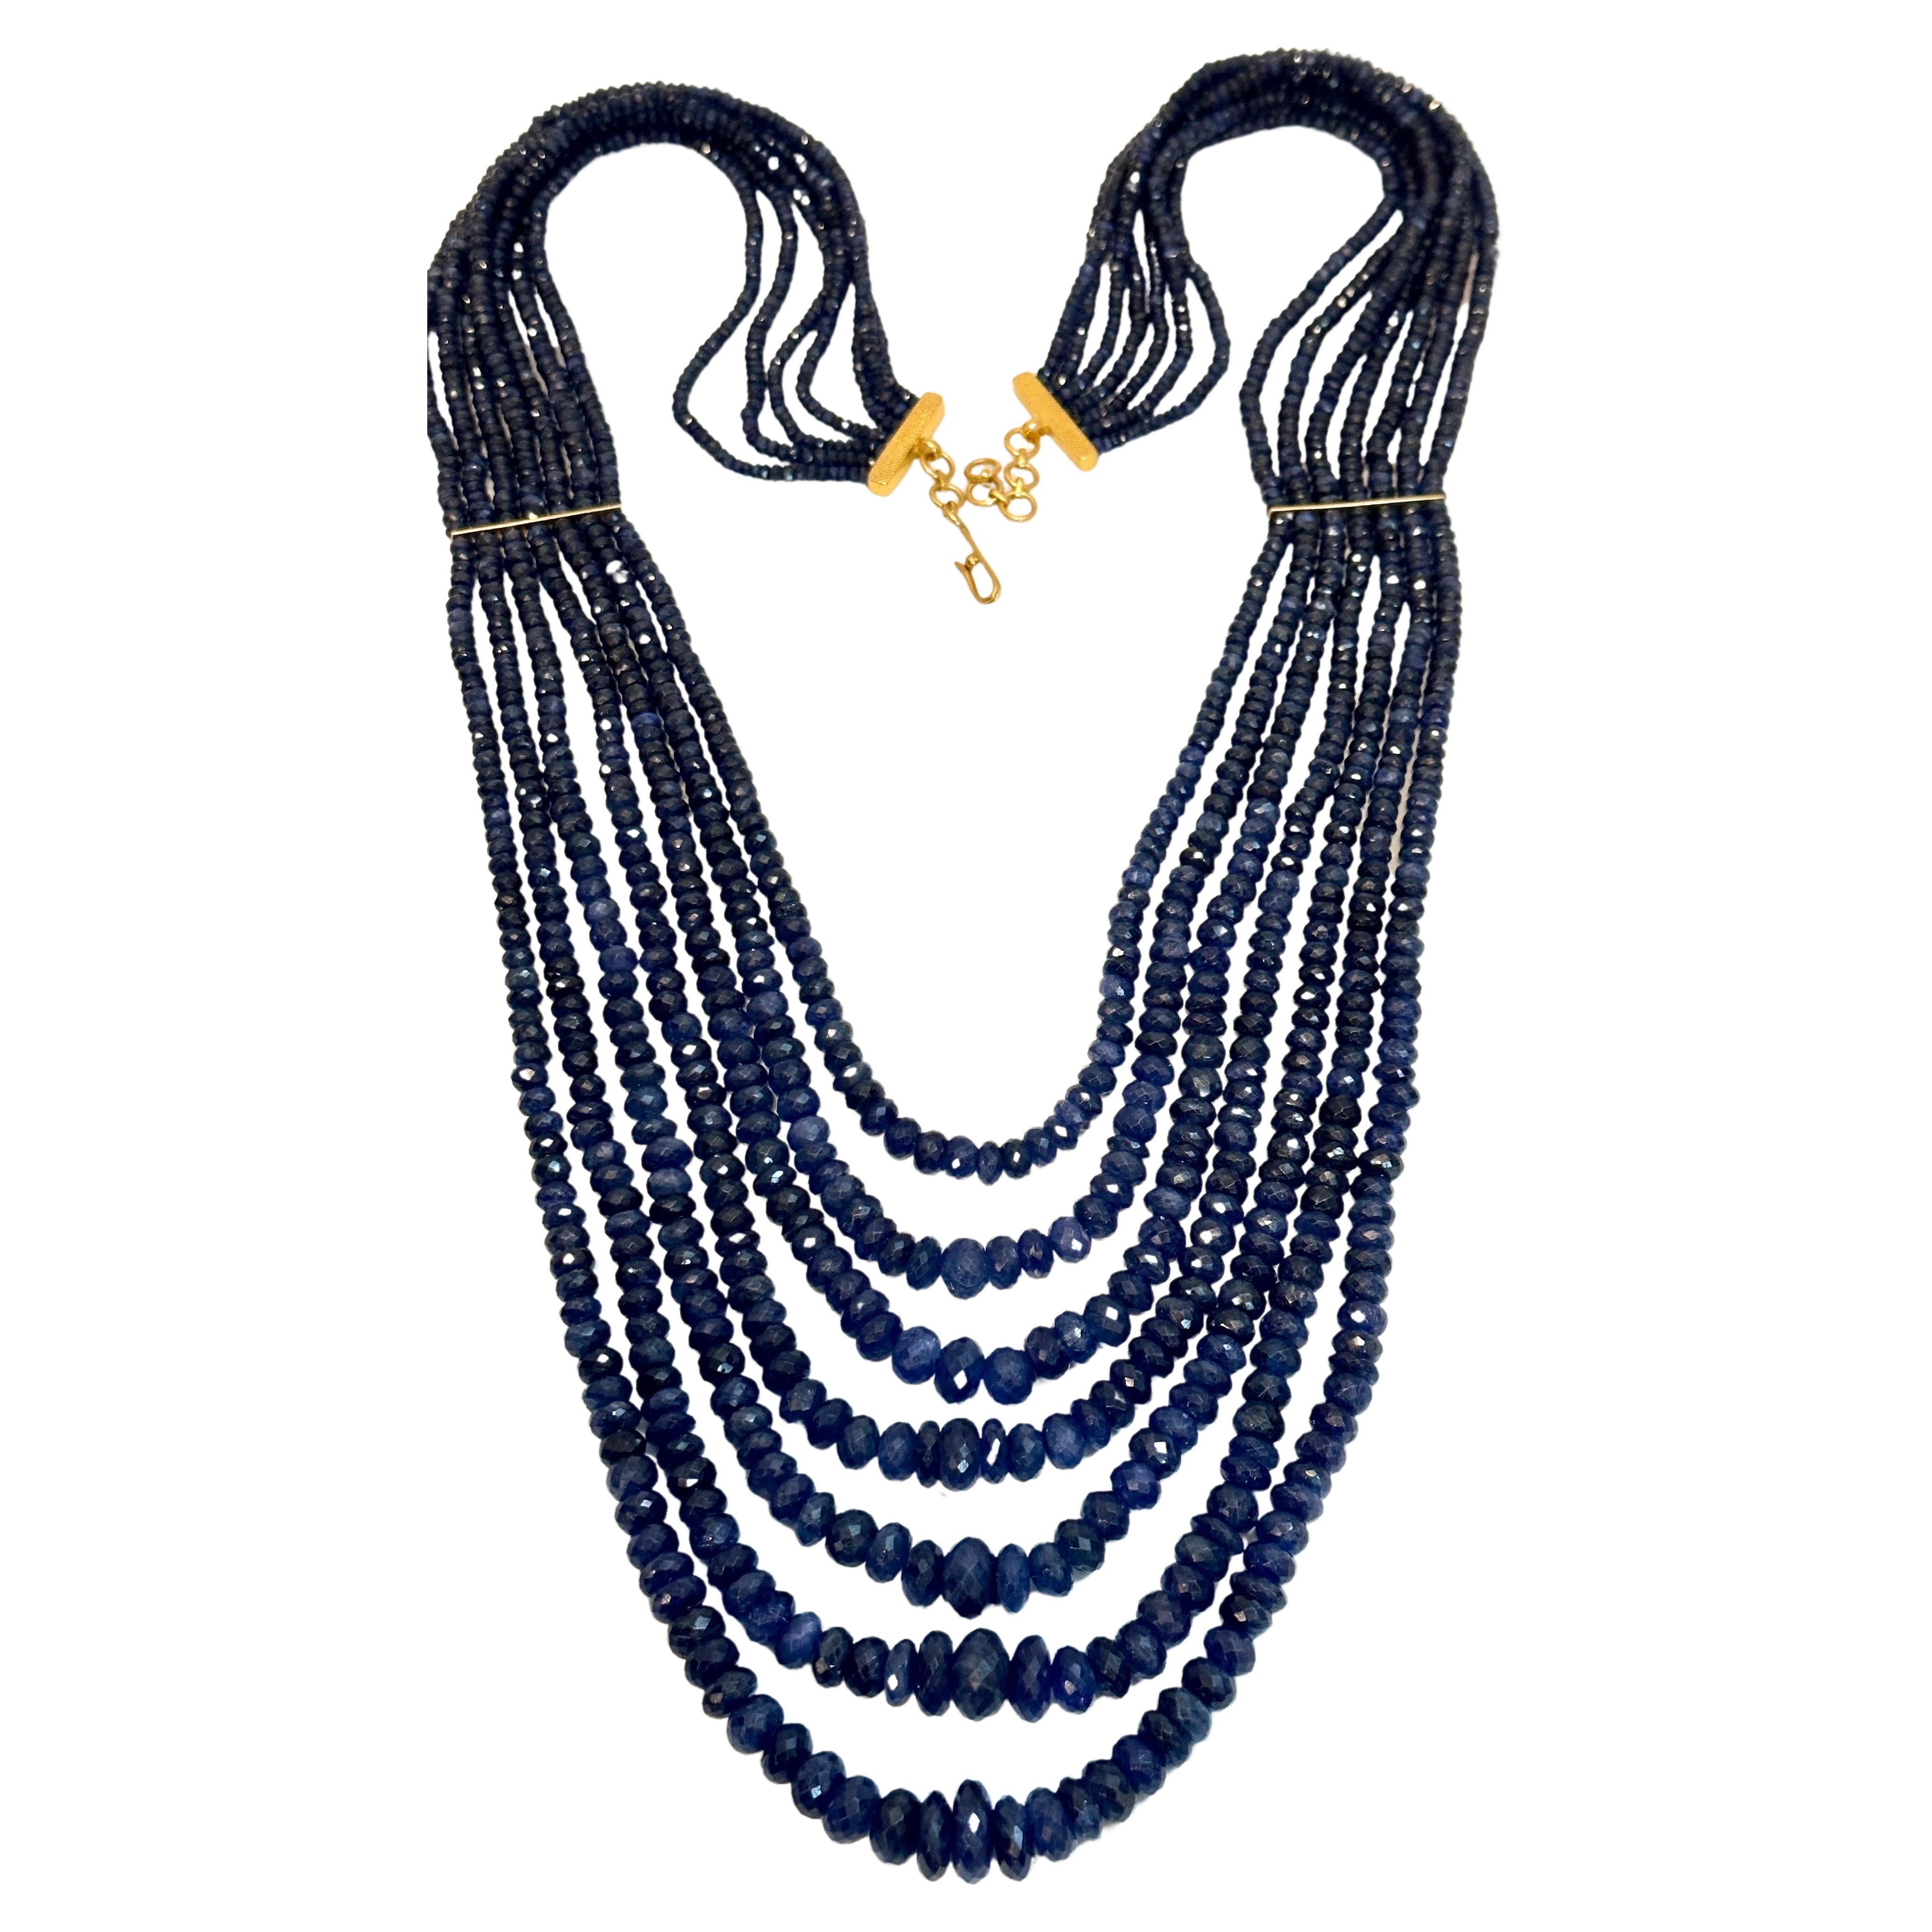 Approximately 760 Carat Natural  very fine Sapphire Bead Seven  Strand Necklace with Spacers in  14 Karat yellow Gold
All natural beads , no color enhancement
28